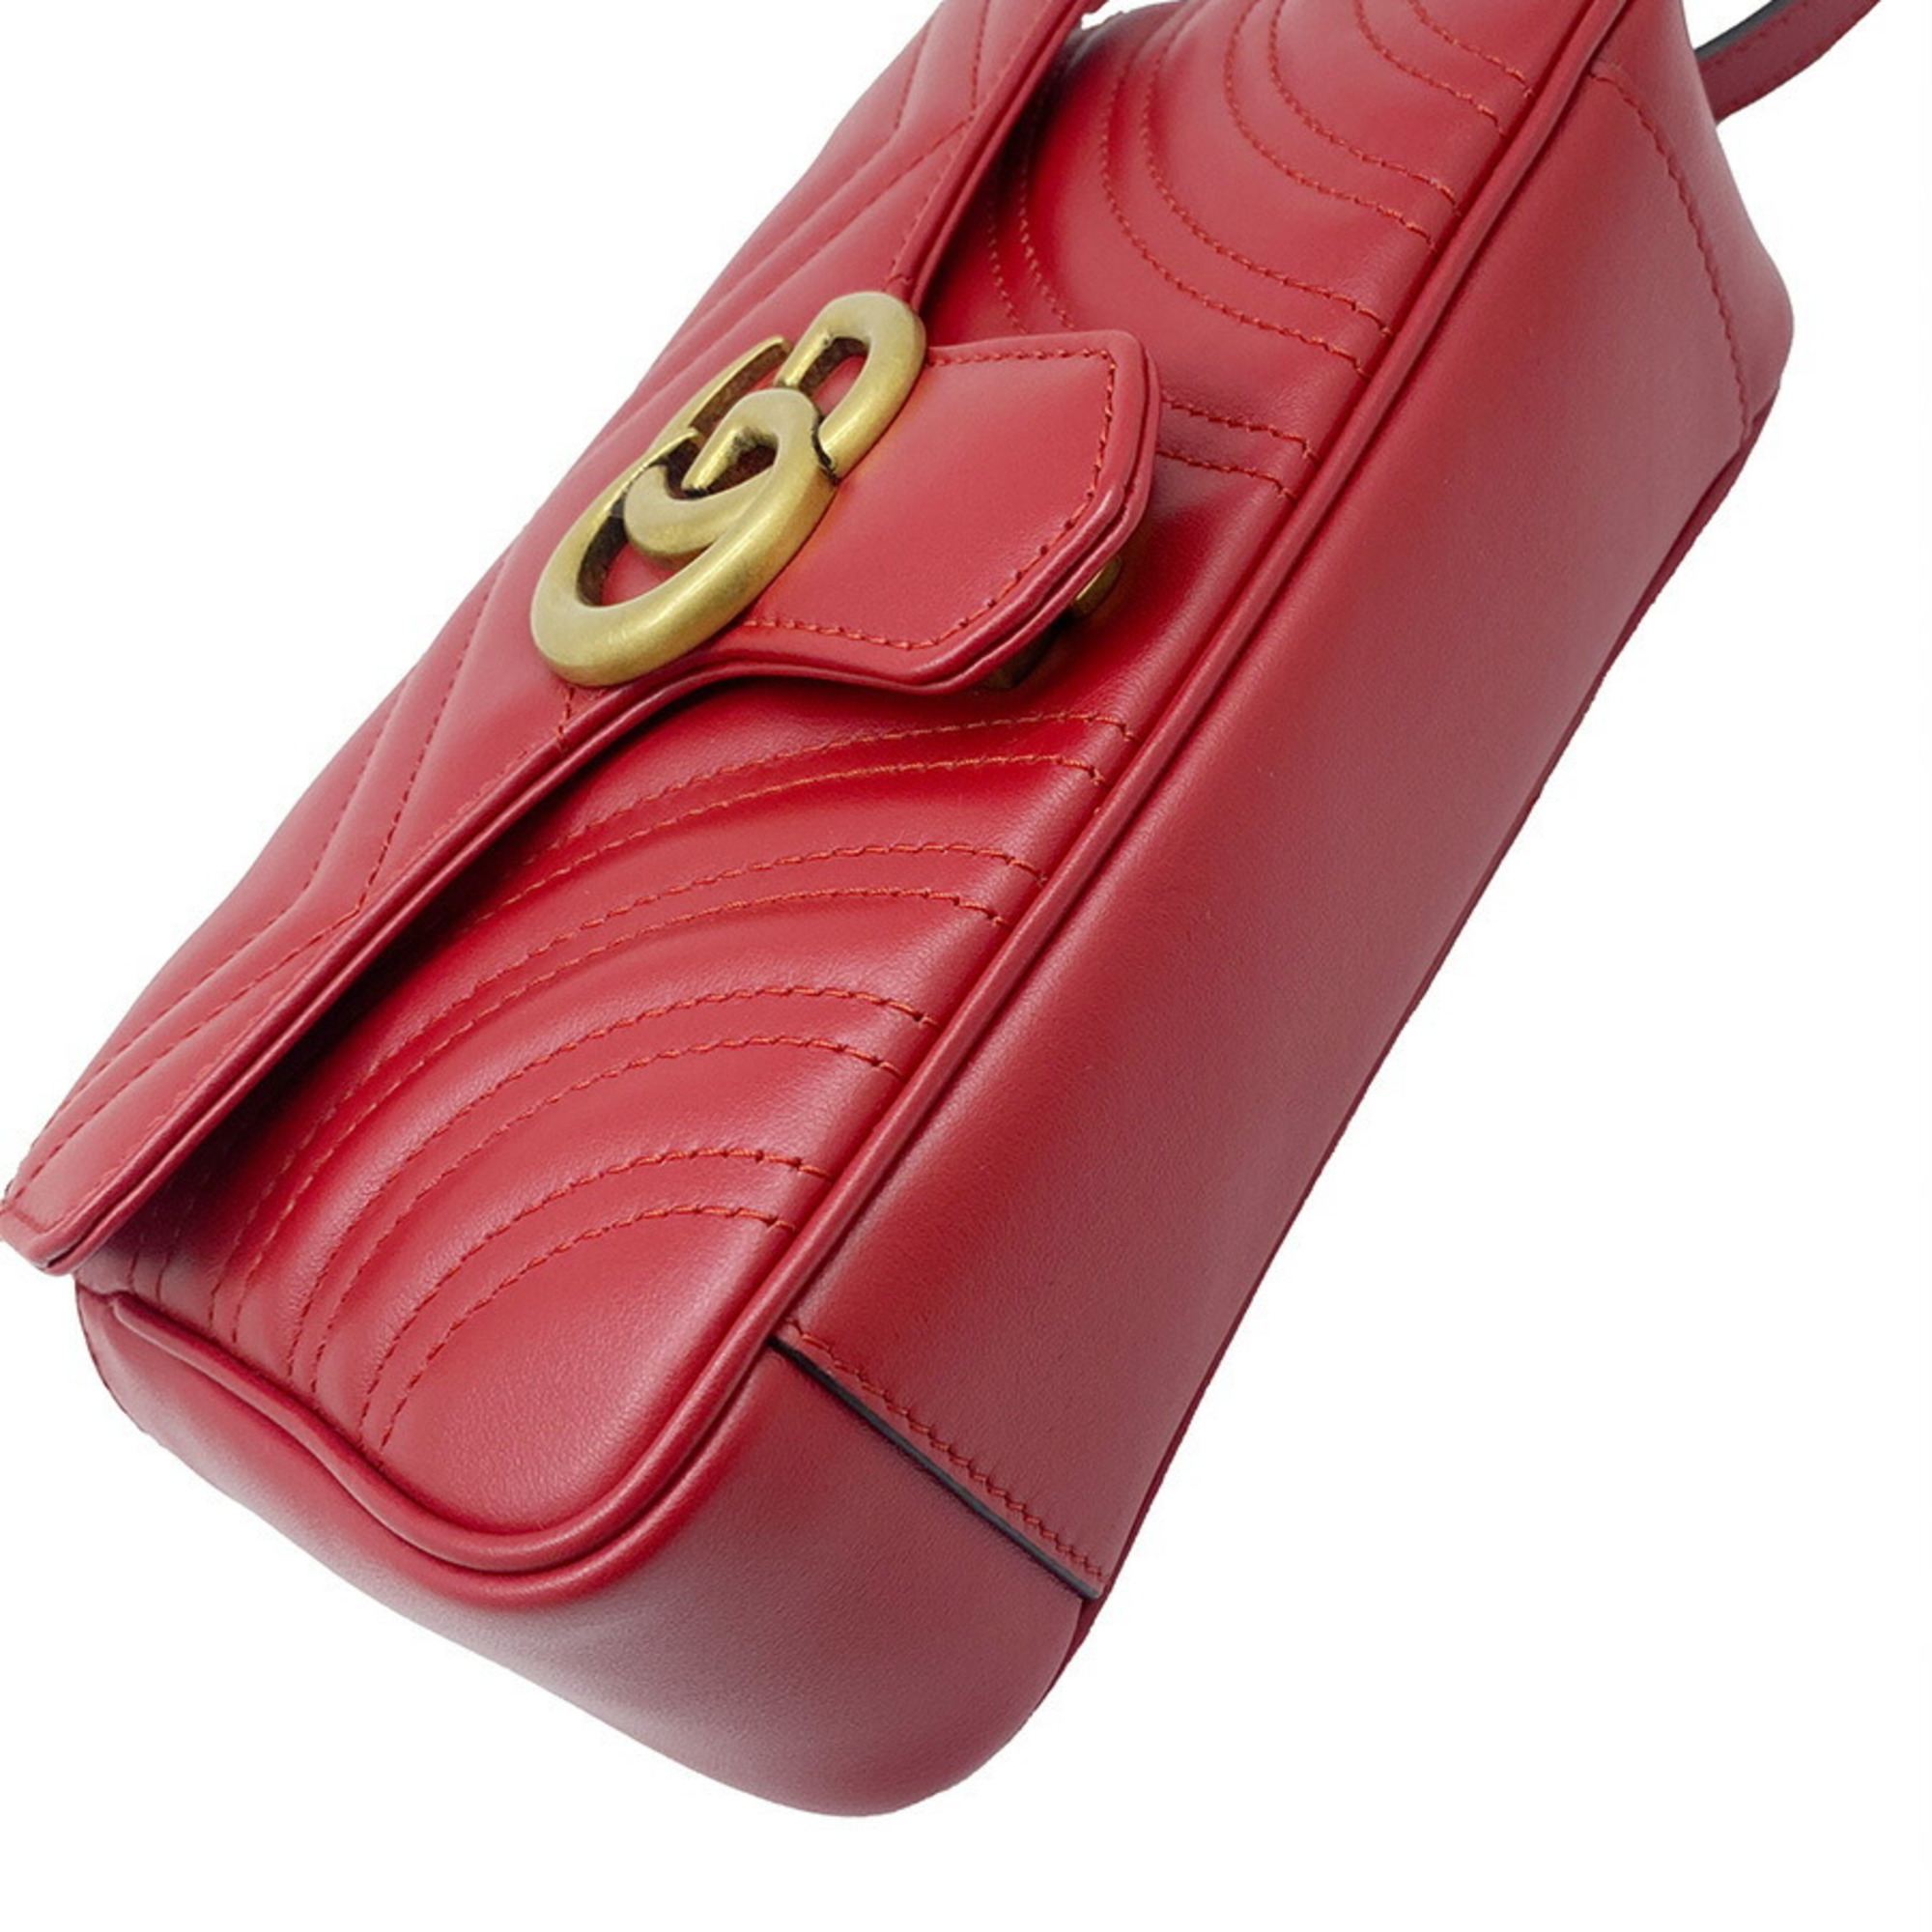 GUCCI Gucci GG Marmont Quilted Bag Shoulder Leather Red 446744 Chain Double G Product Ladies